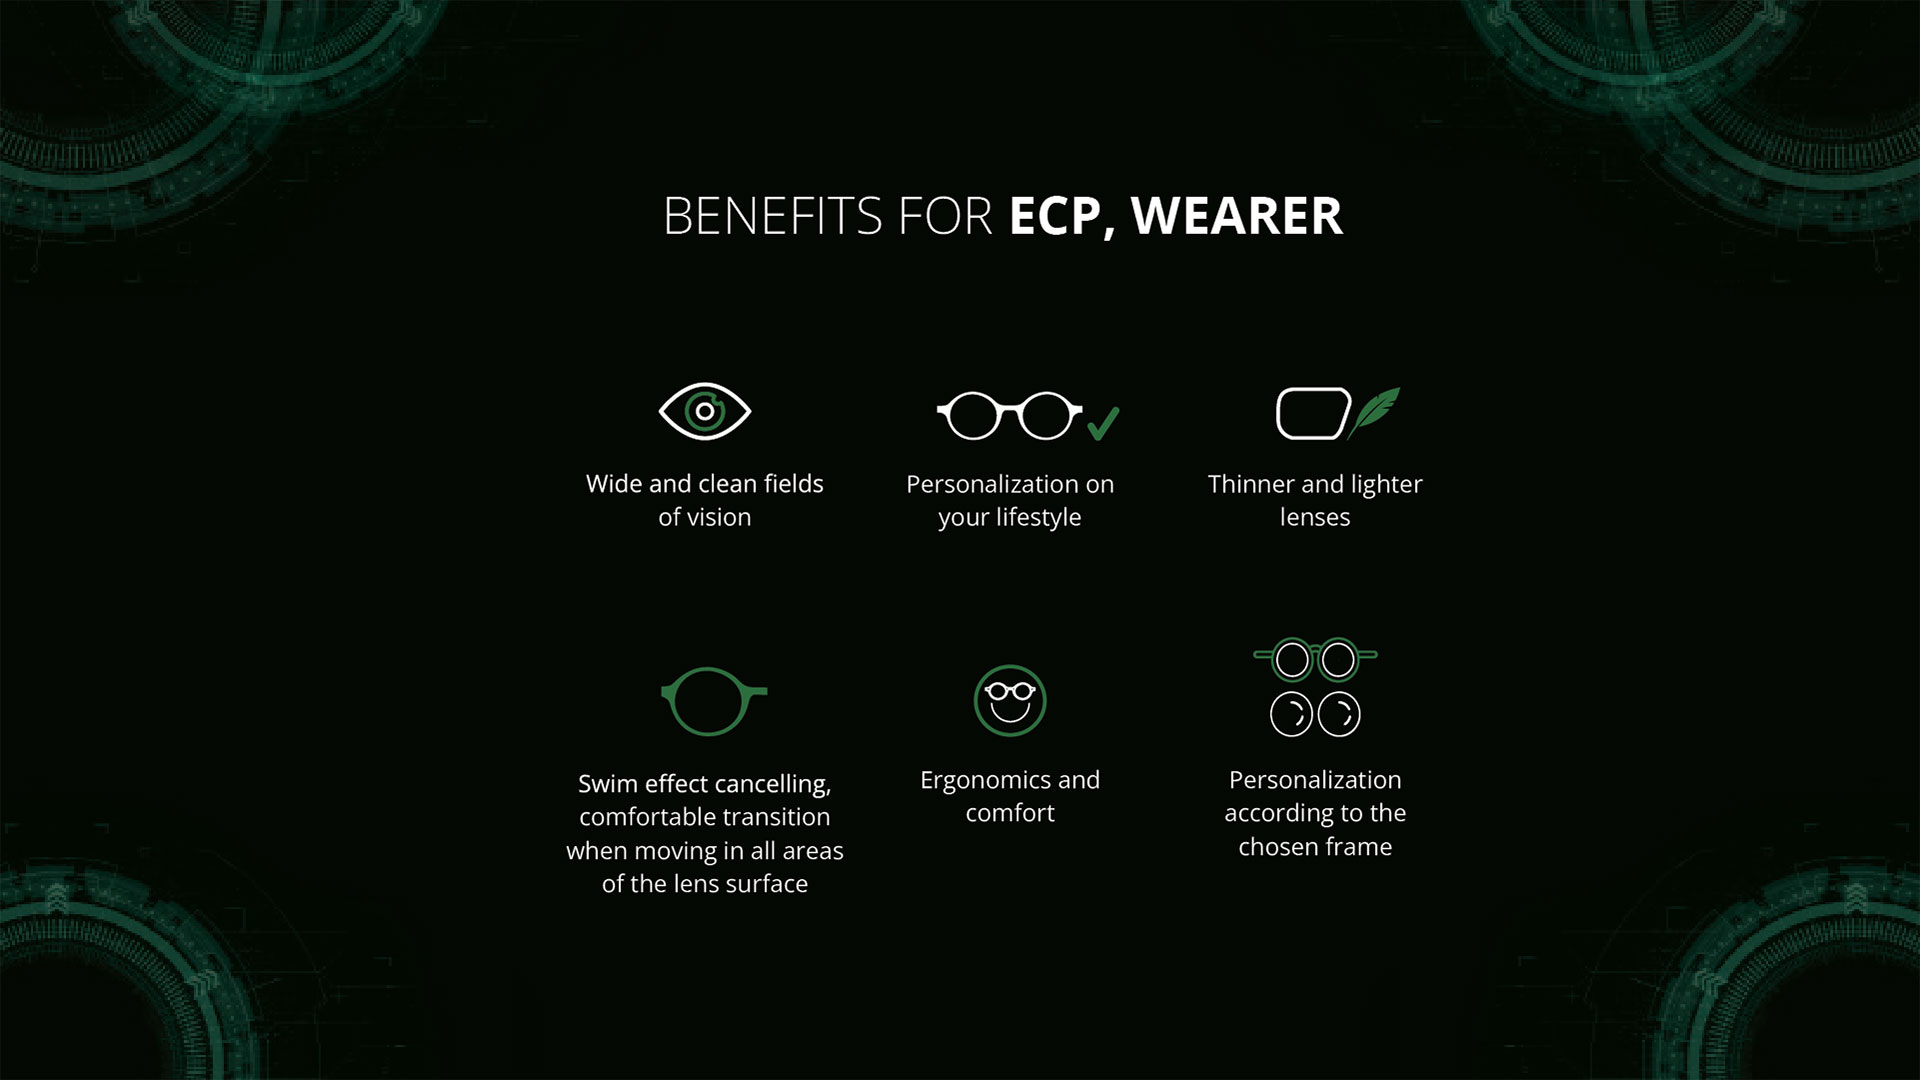 BENEFITS FOR ECP, WEARER: Wide and clean fields of vision. Personalization on your lifestyle. Thinner and lighter lenses. Swim effect elimination. Comfortable transitions between different areas of the lens. Ergonomics and comfort . Personalization according to the chosen frame. 